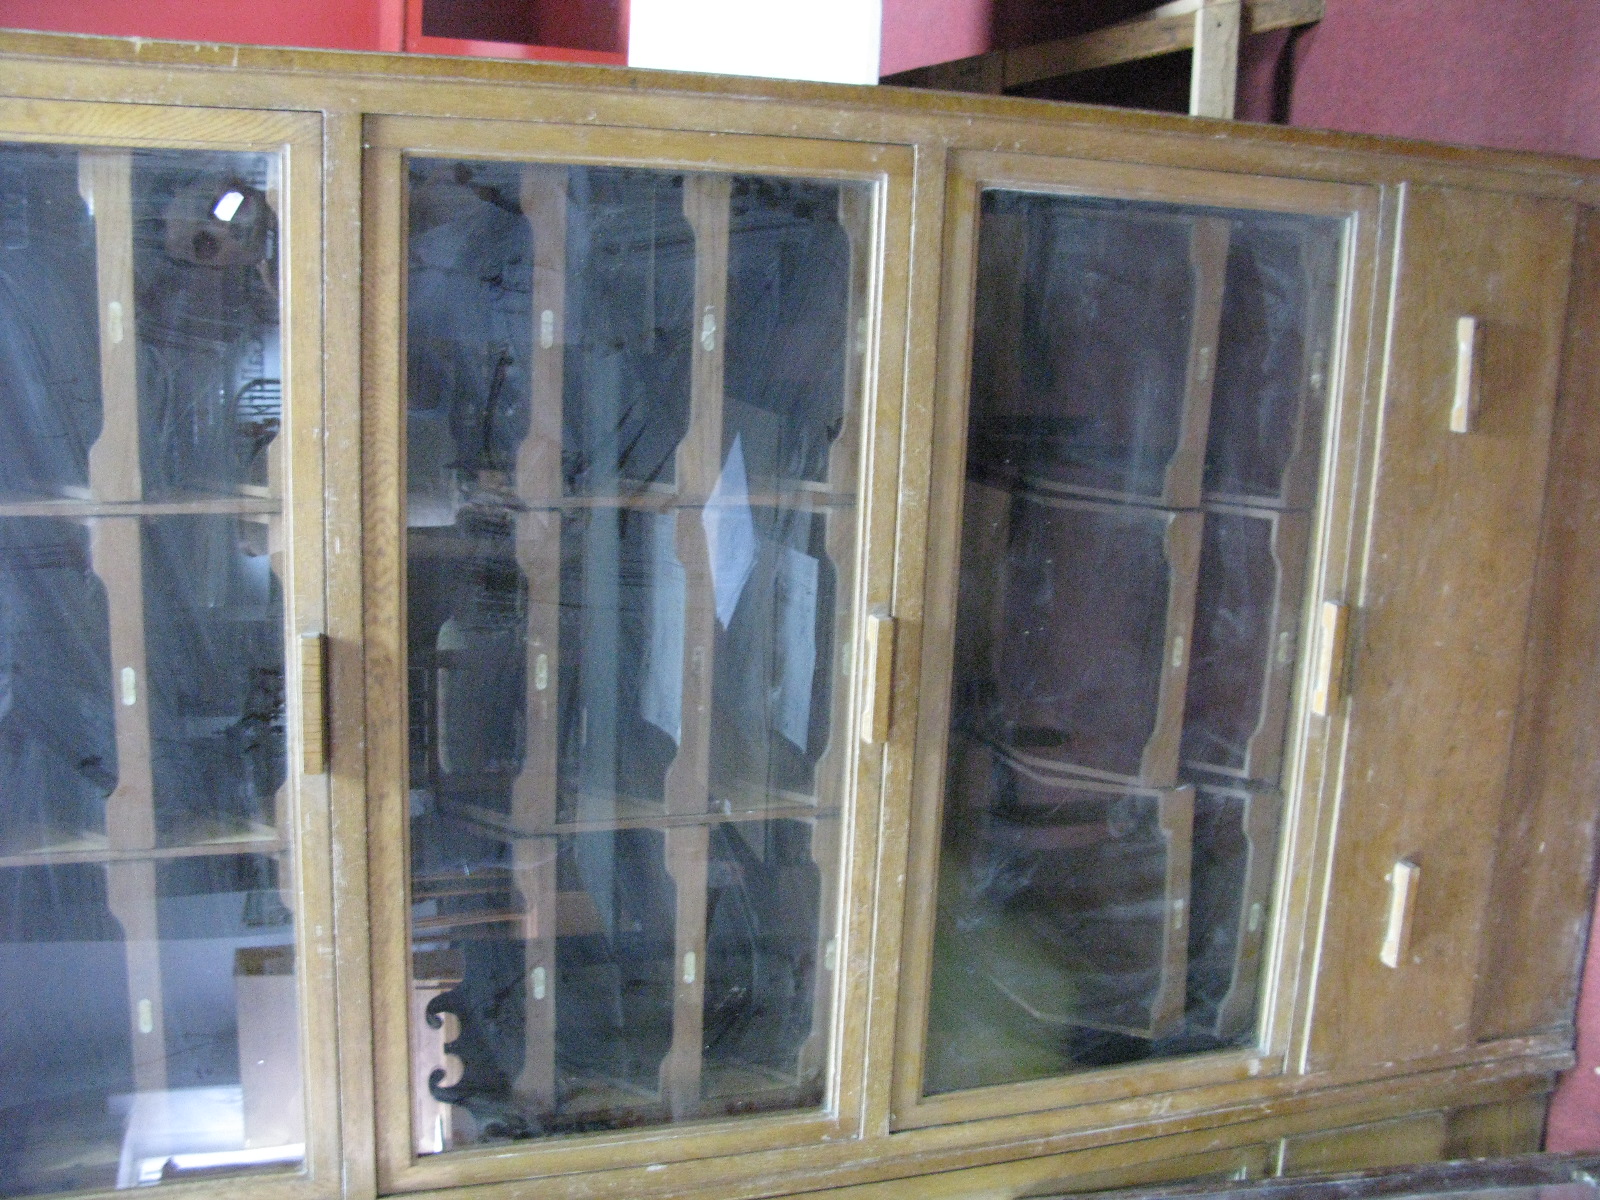 An Early - Mid XX Century Light Oak Haberdashery Shop Display Cabinets, with lift up glass doors, - Image 3 of 4